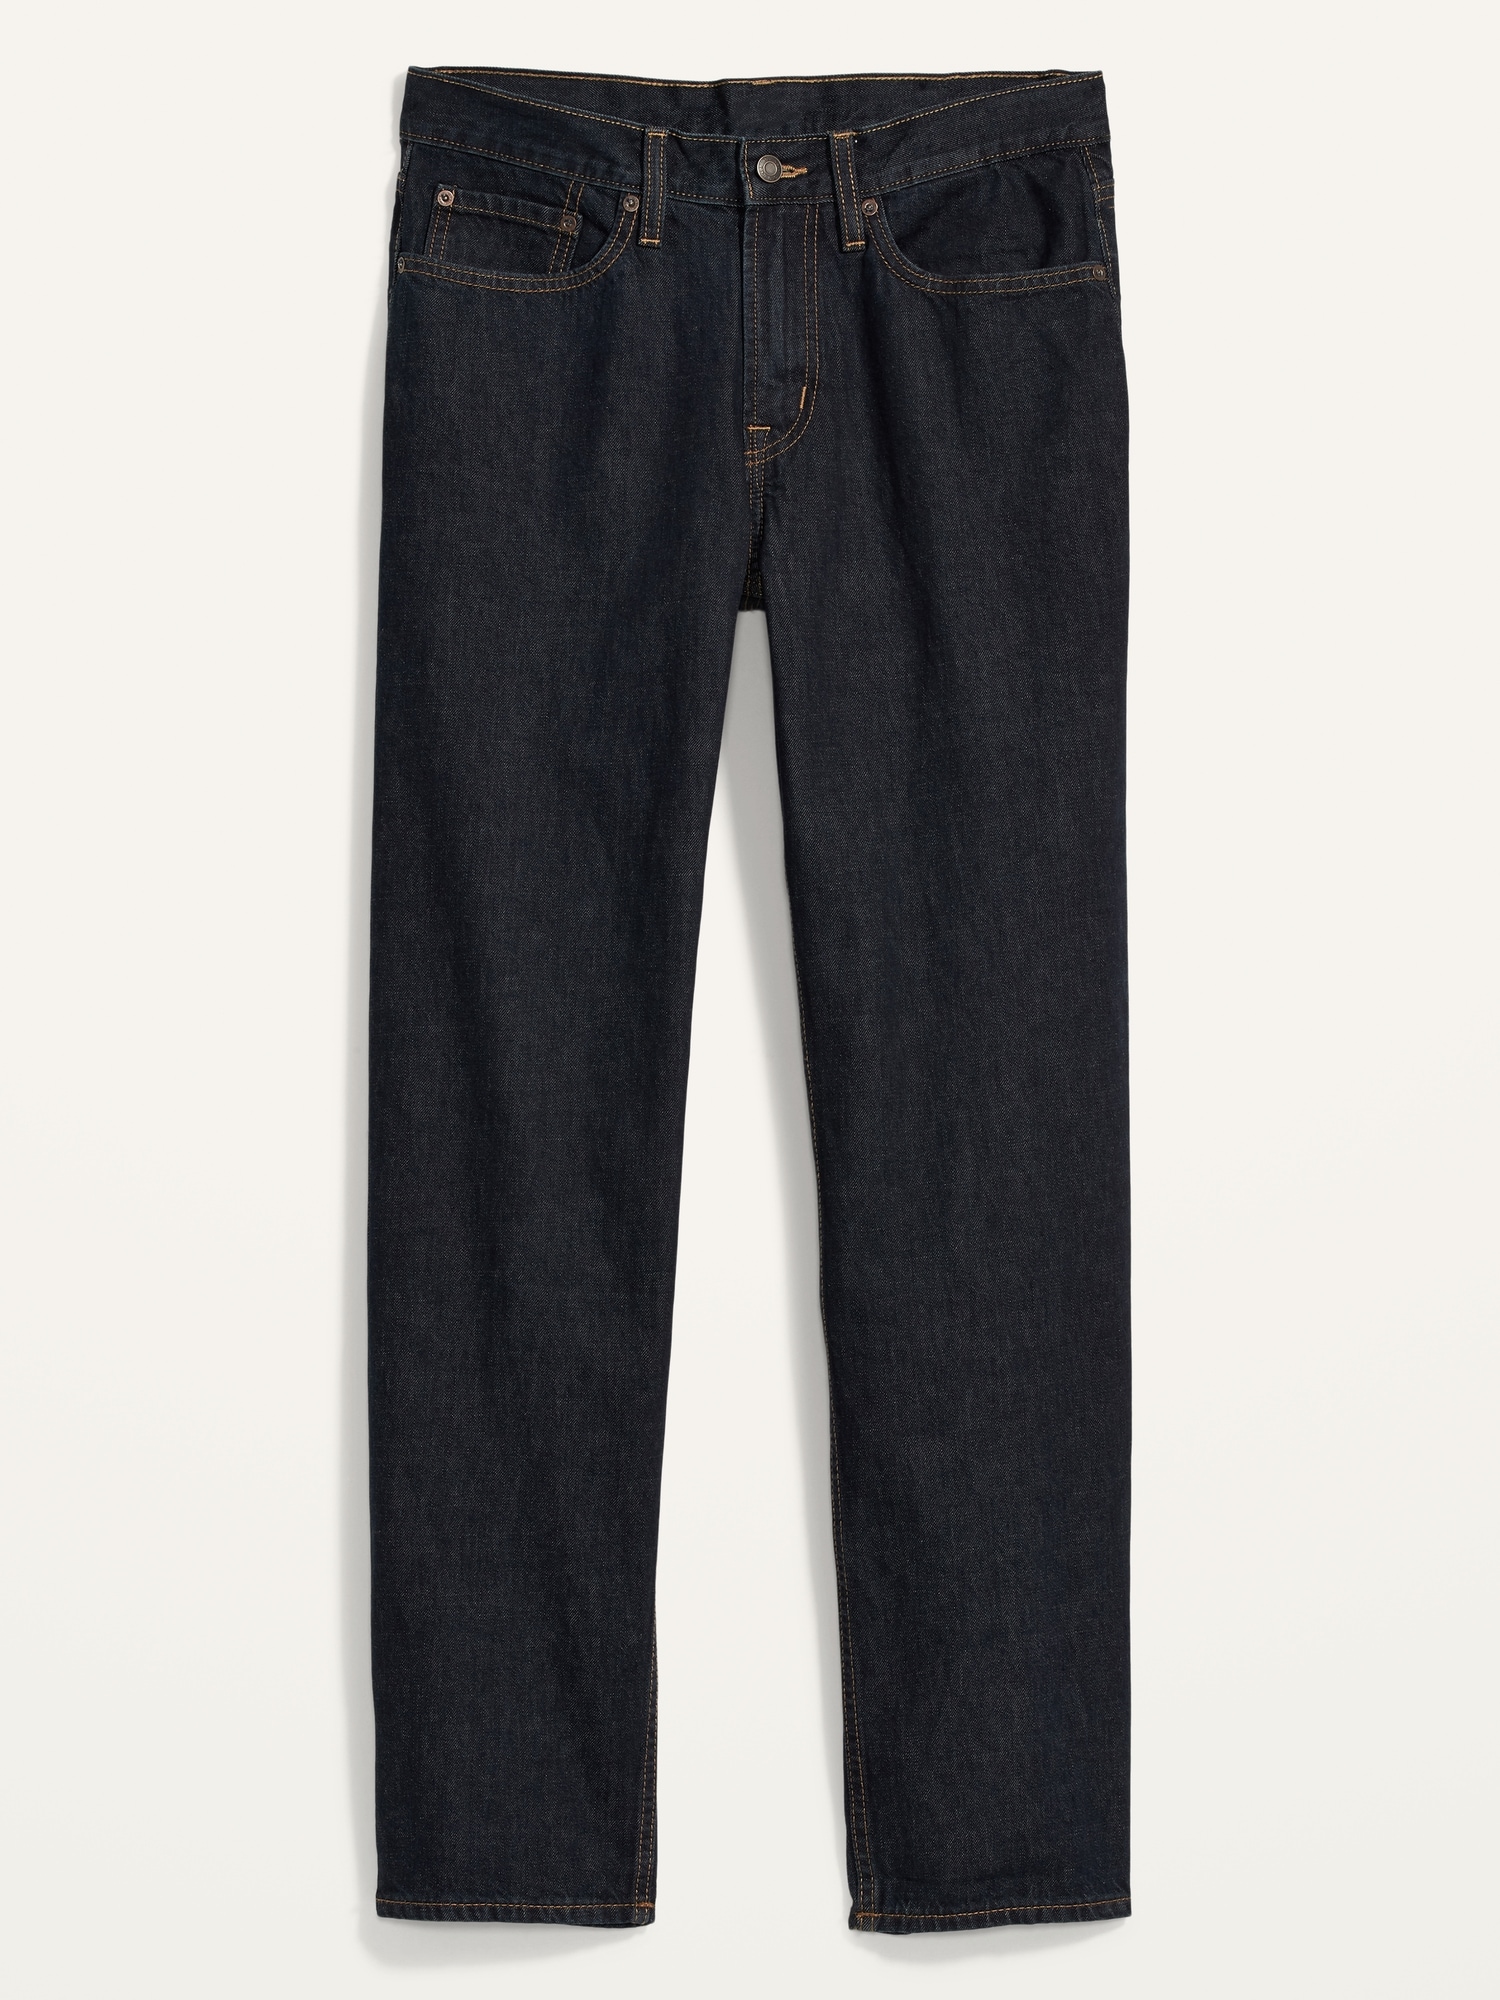 Wow Loose Non-Stretch Jeans Men | Old Navy